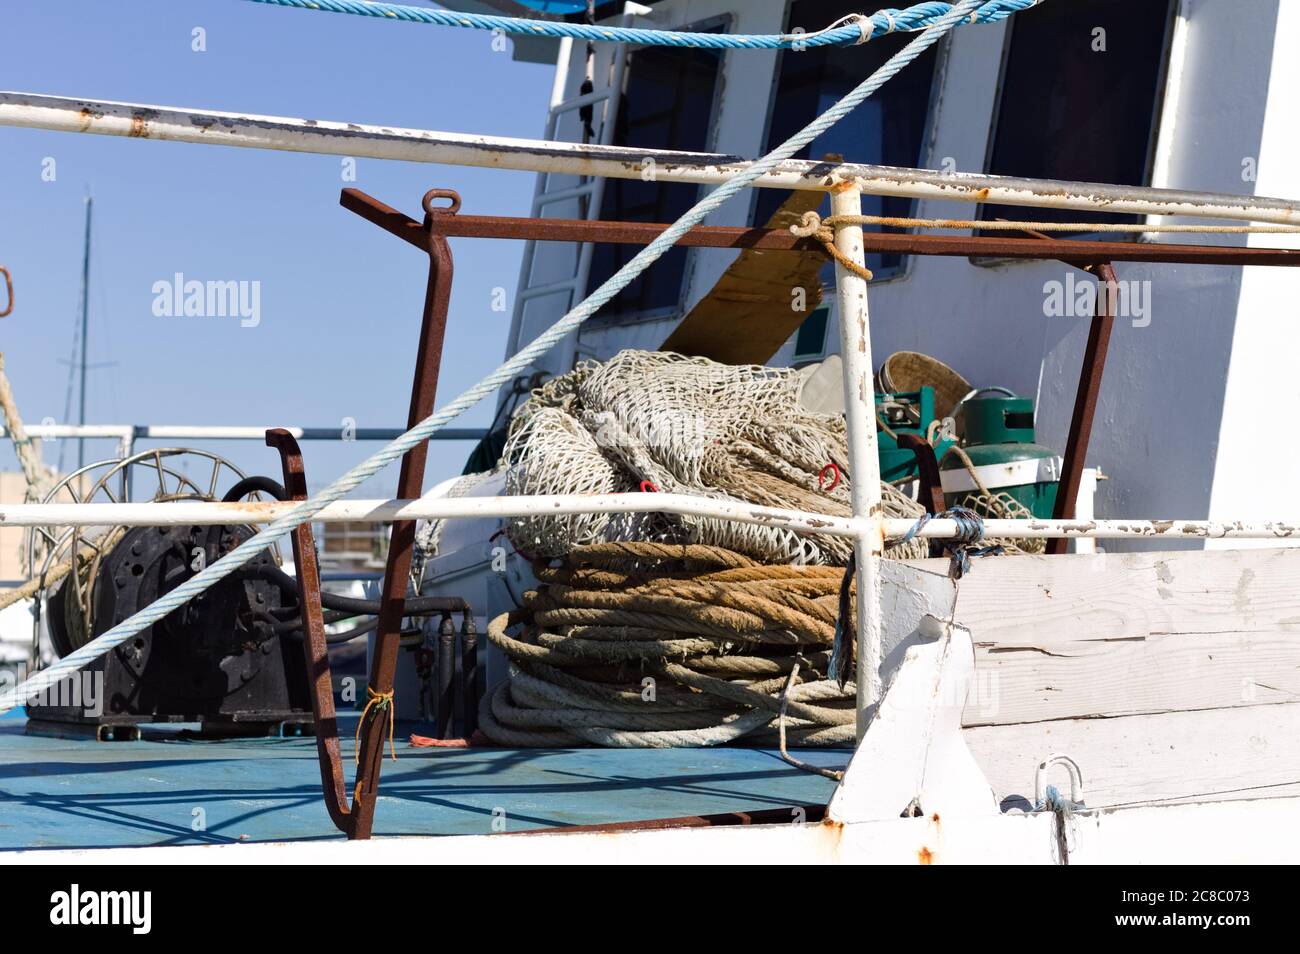 https://c8.alamy.com/comp/2C8C073/a-fishing-boat-with-a-lot-of-fishing-items-on-board-pesaro-italy-europe-2C8C073.jpg